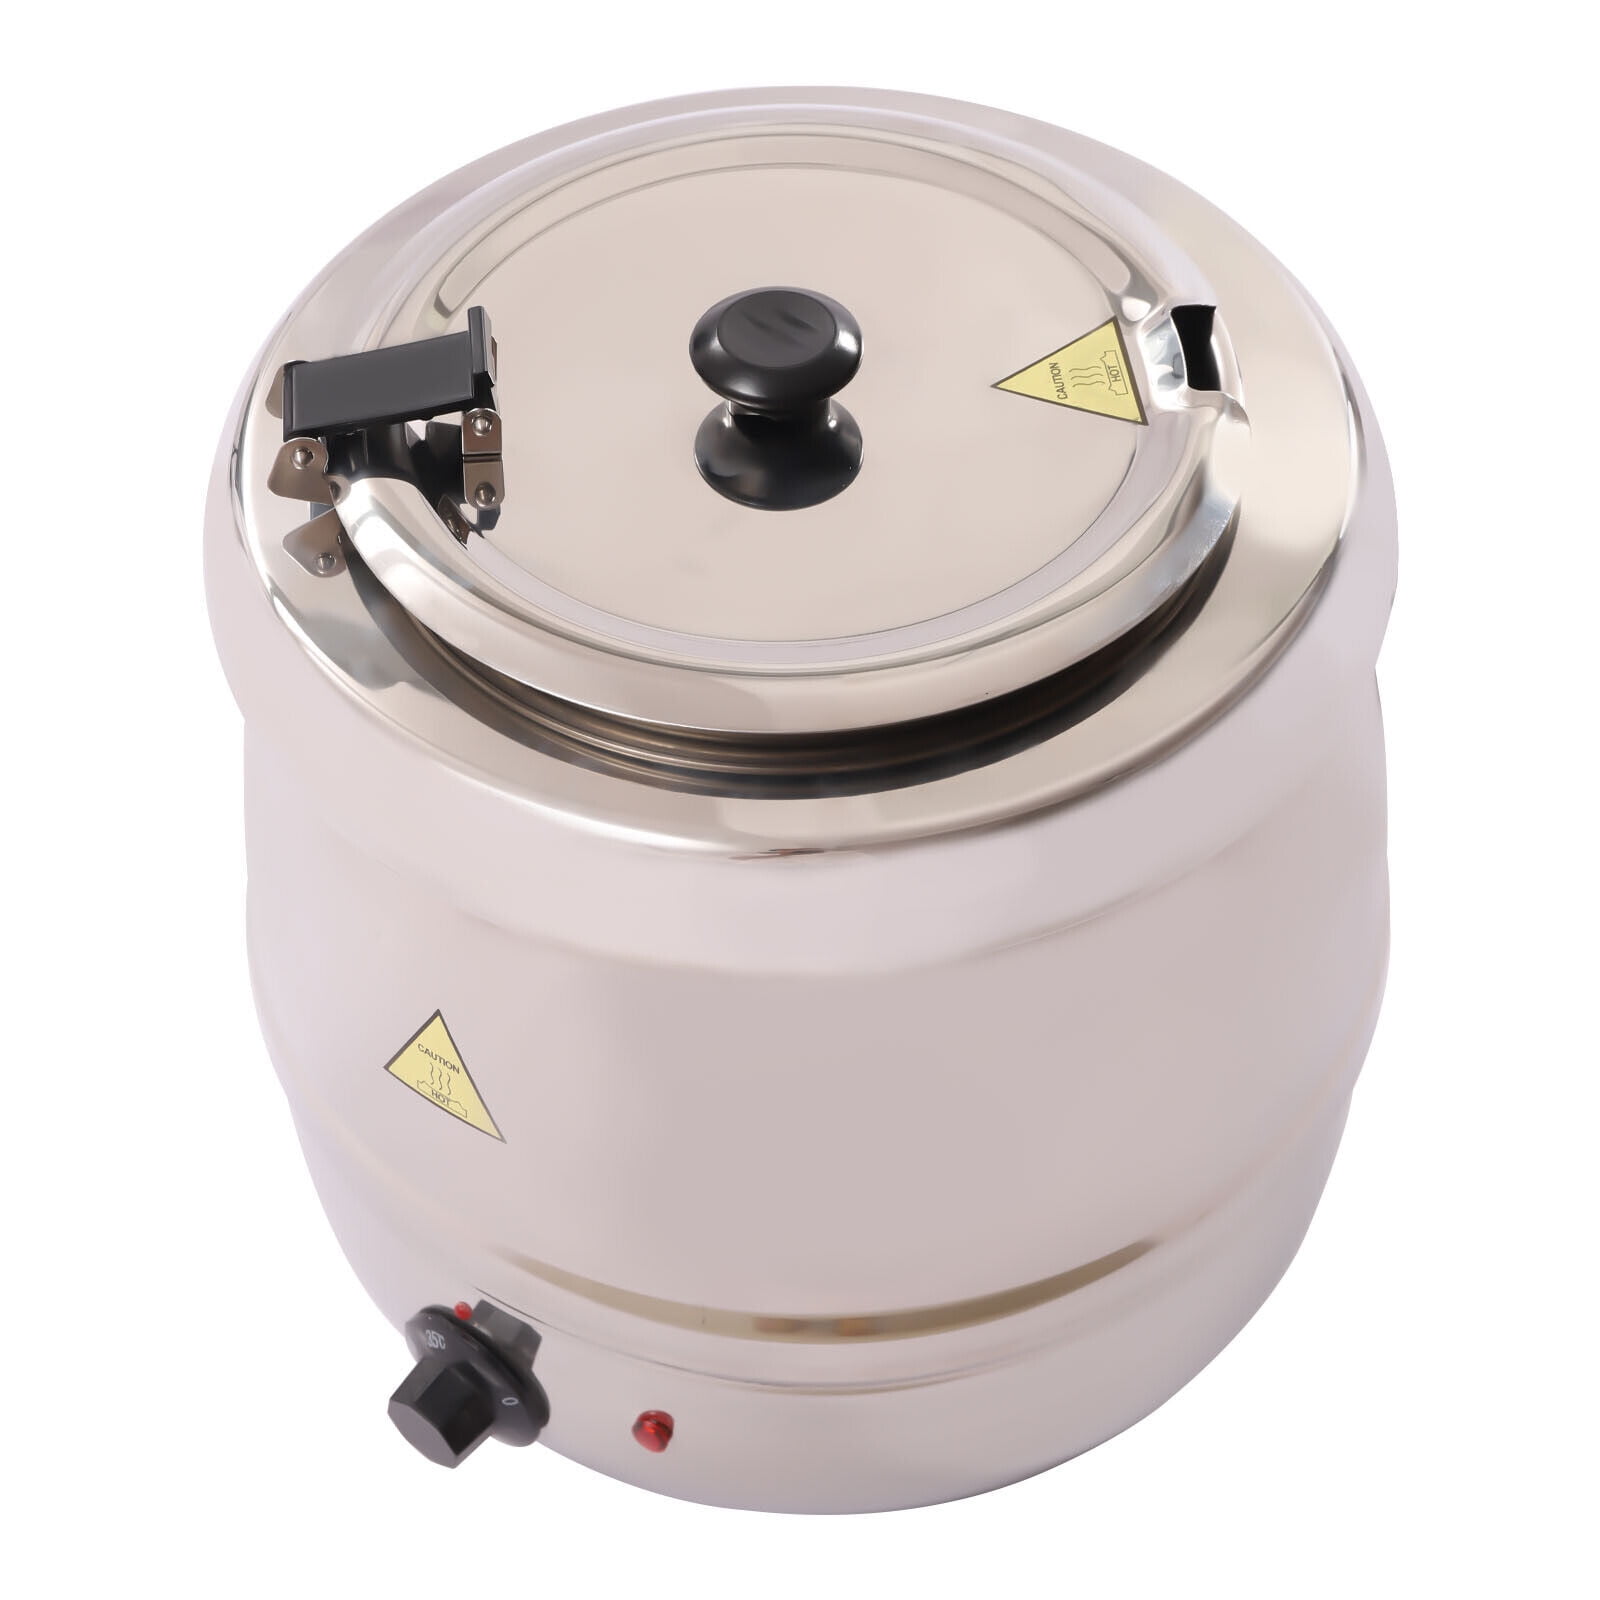 large capacity 10l 30l insulated soup